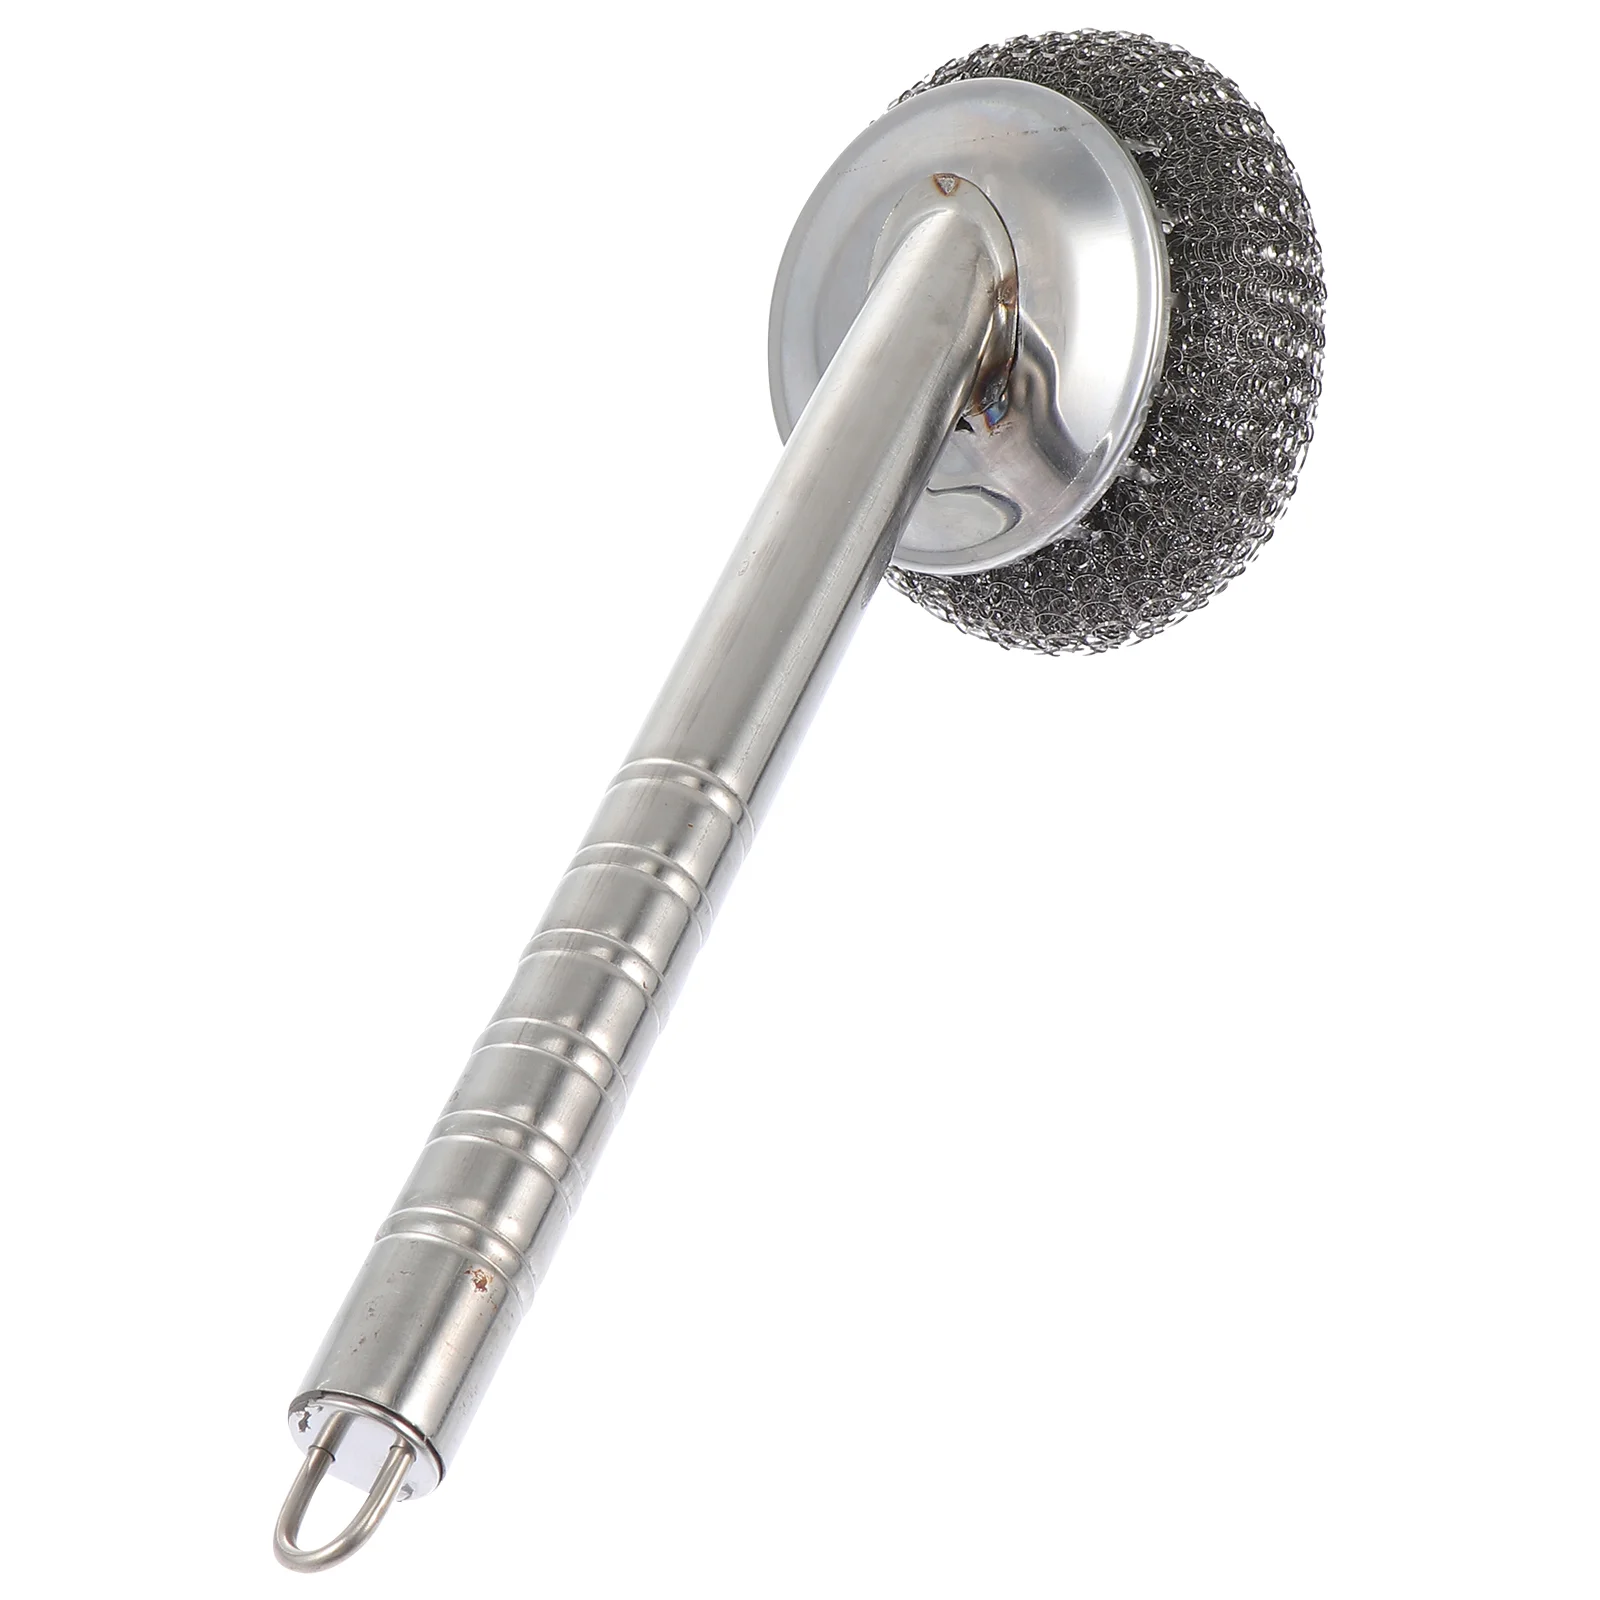 Stainless steel scrubbers